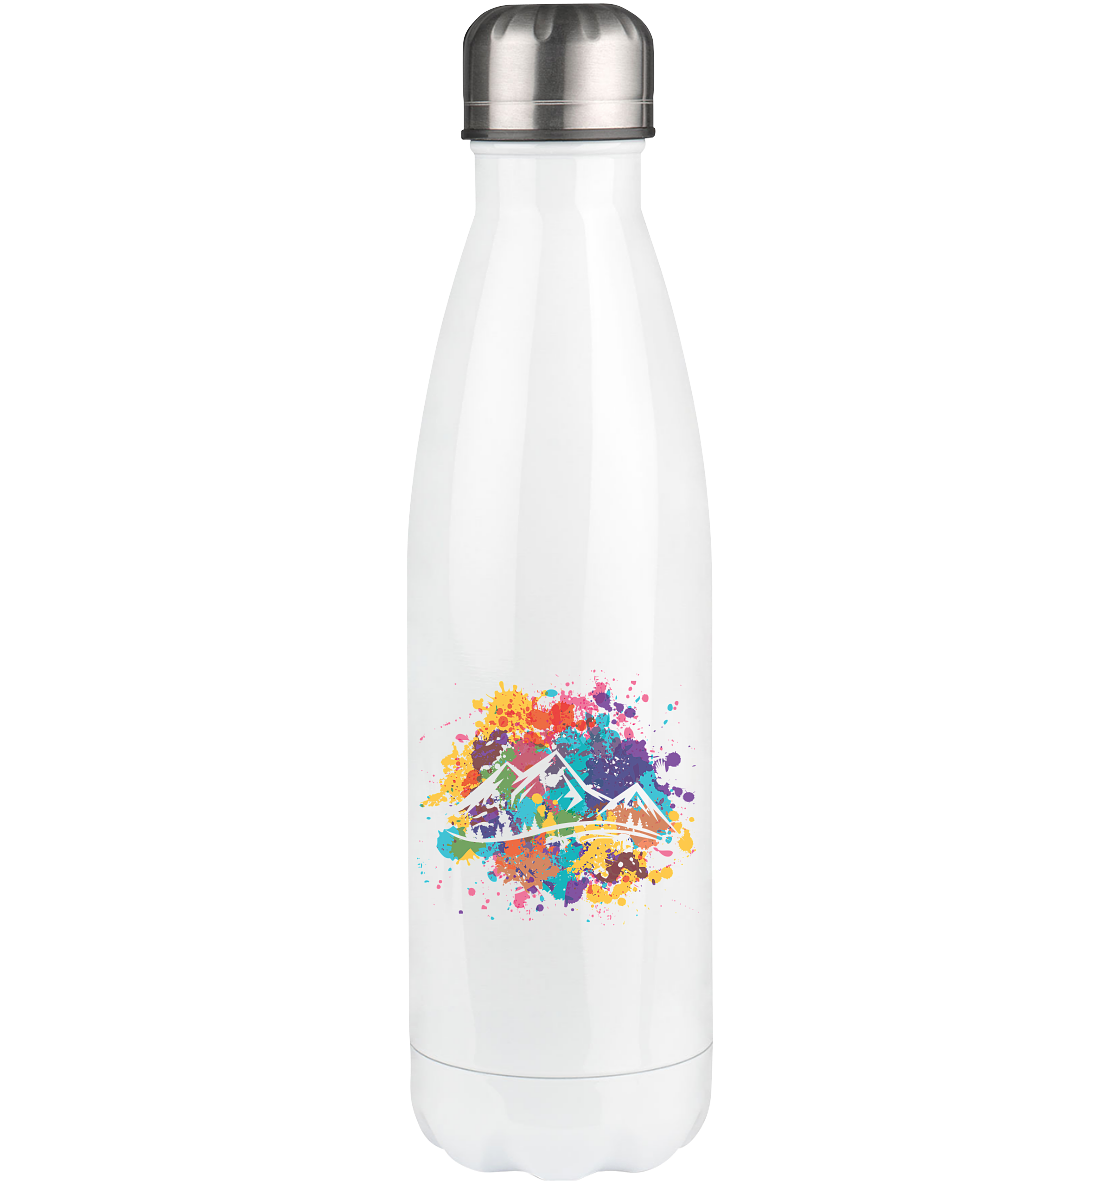 Colorful Splash and Mountain - Edelstahl Thermosflasche berge 500ml